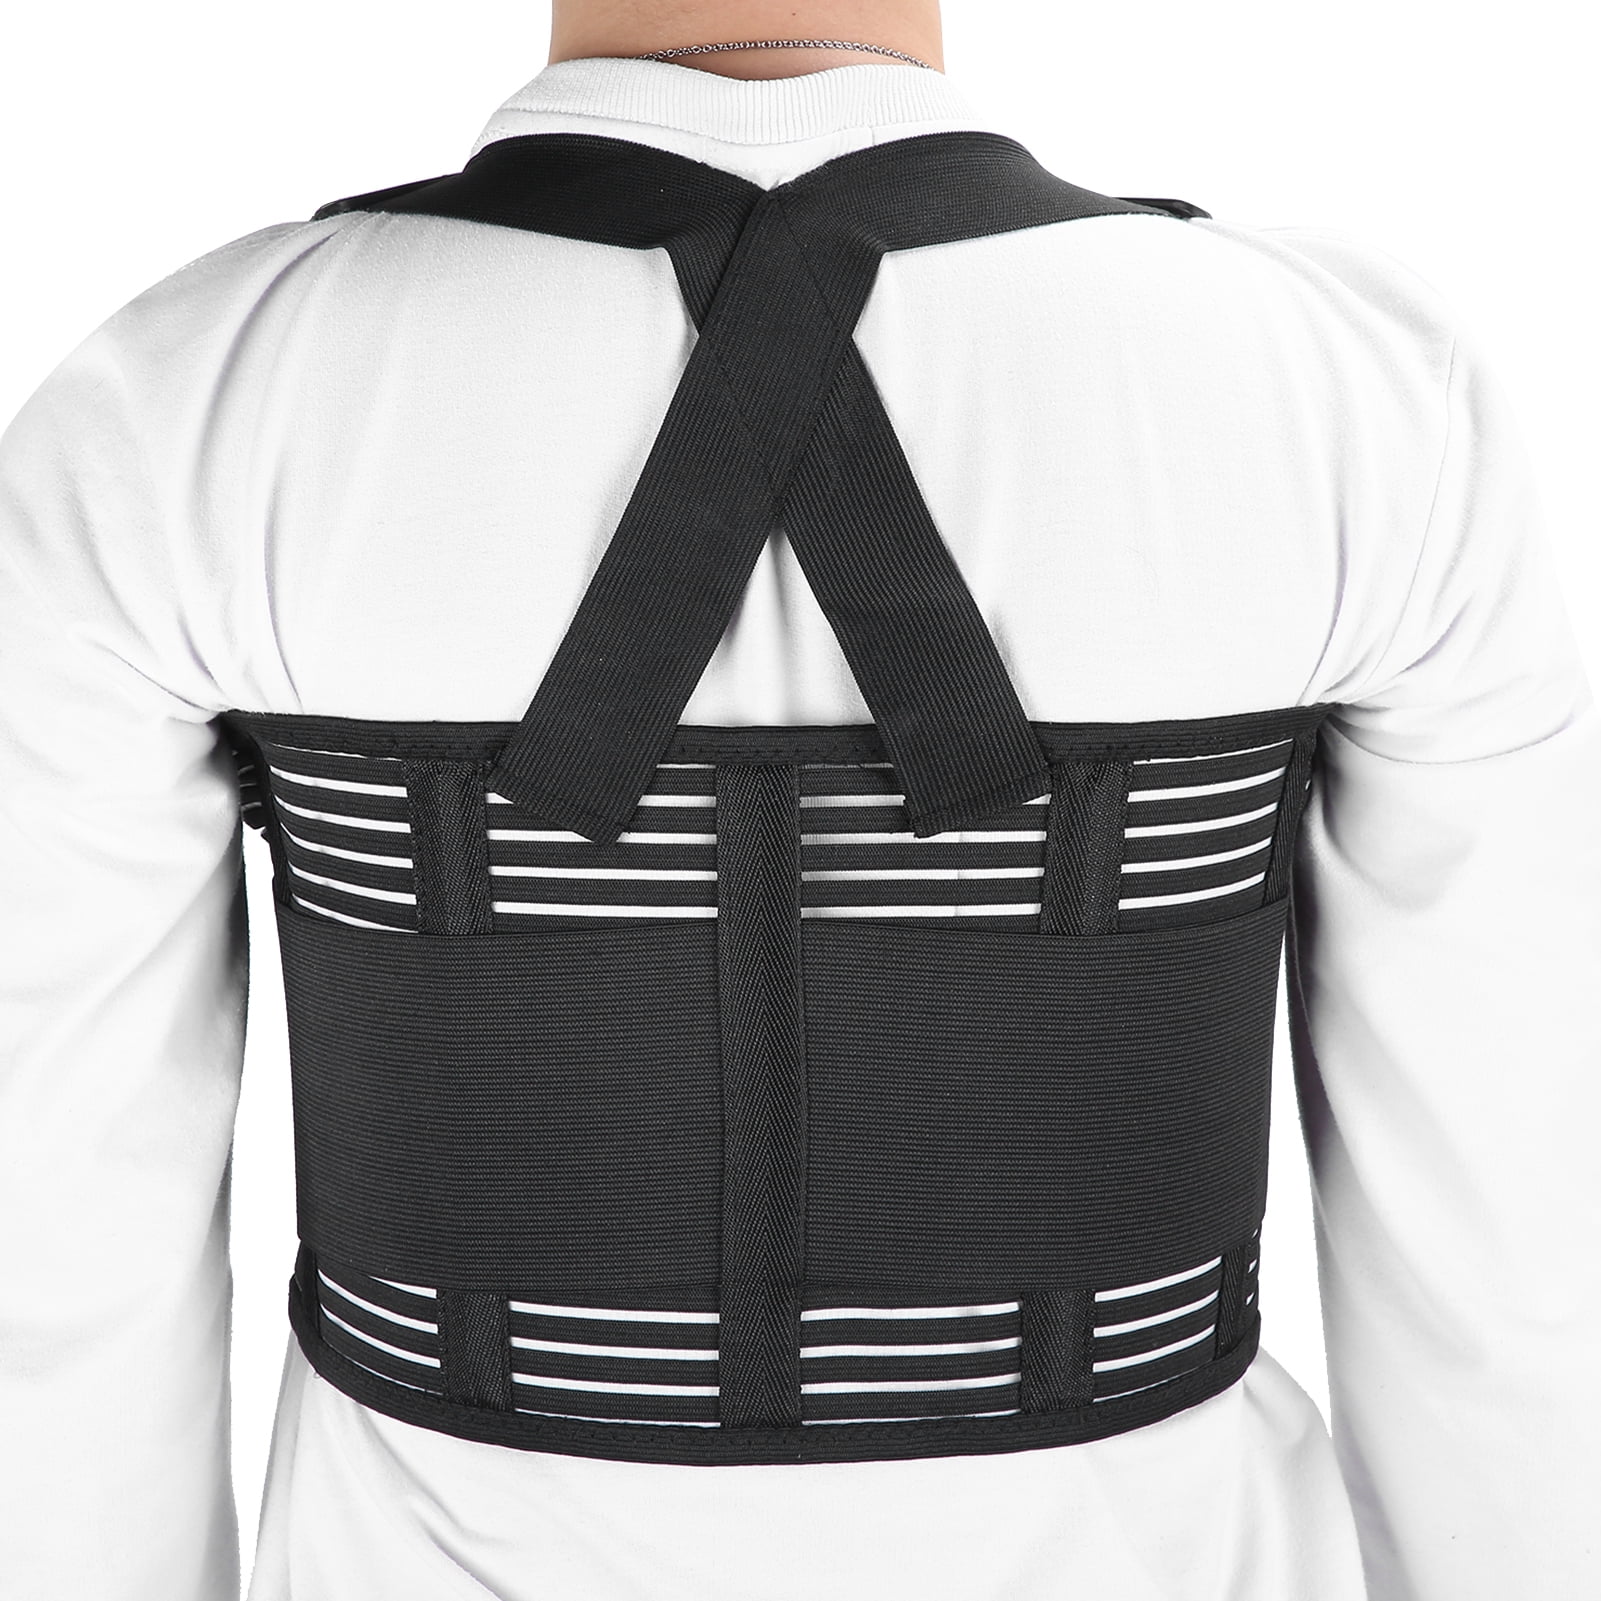 Breathable Broken Rib Chest Brace Support Protector Wrap Belt